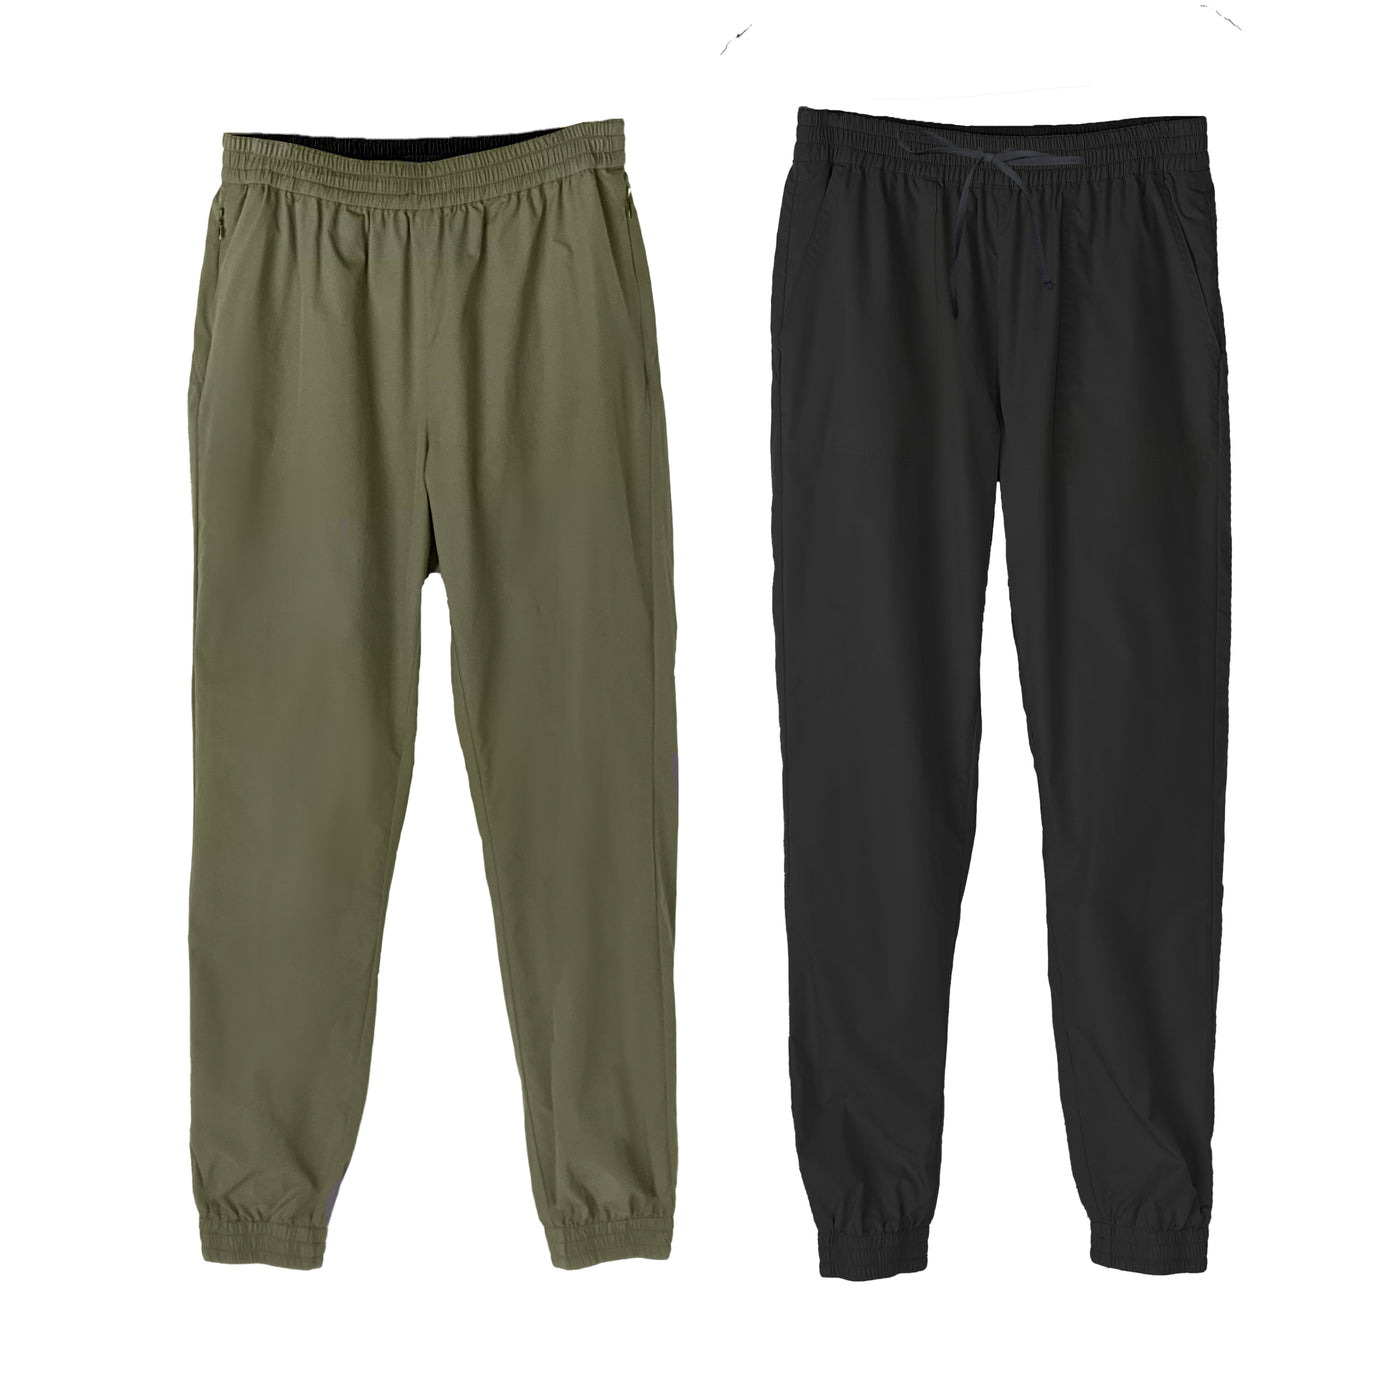 SPLICE clothing Phoenix Reversible Joggers black and olive green